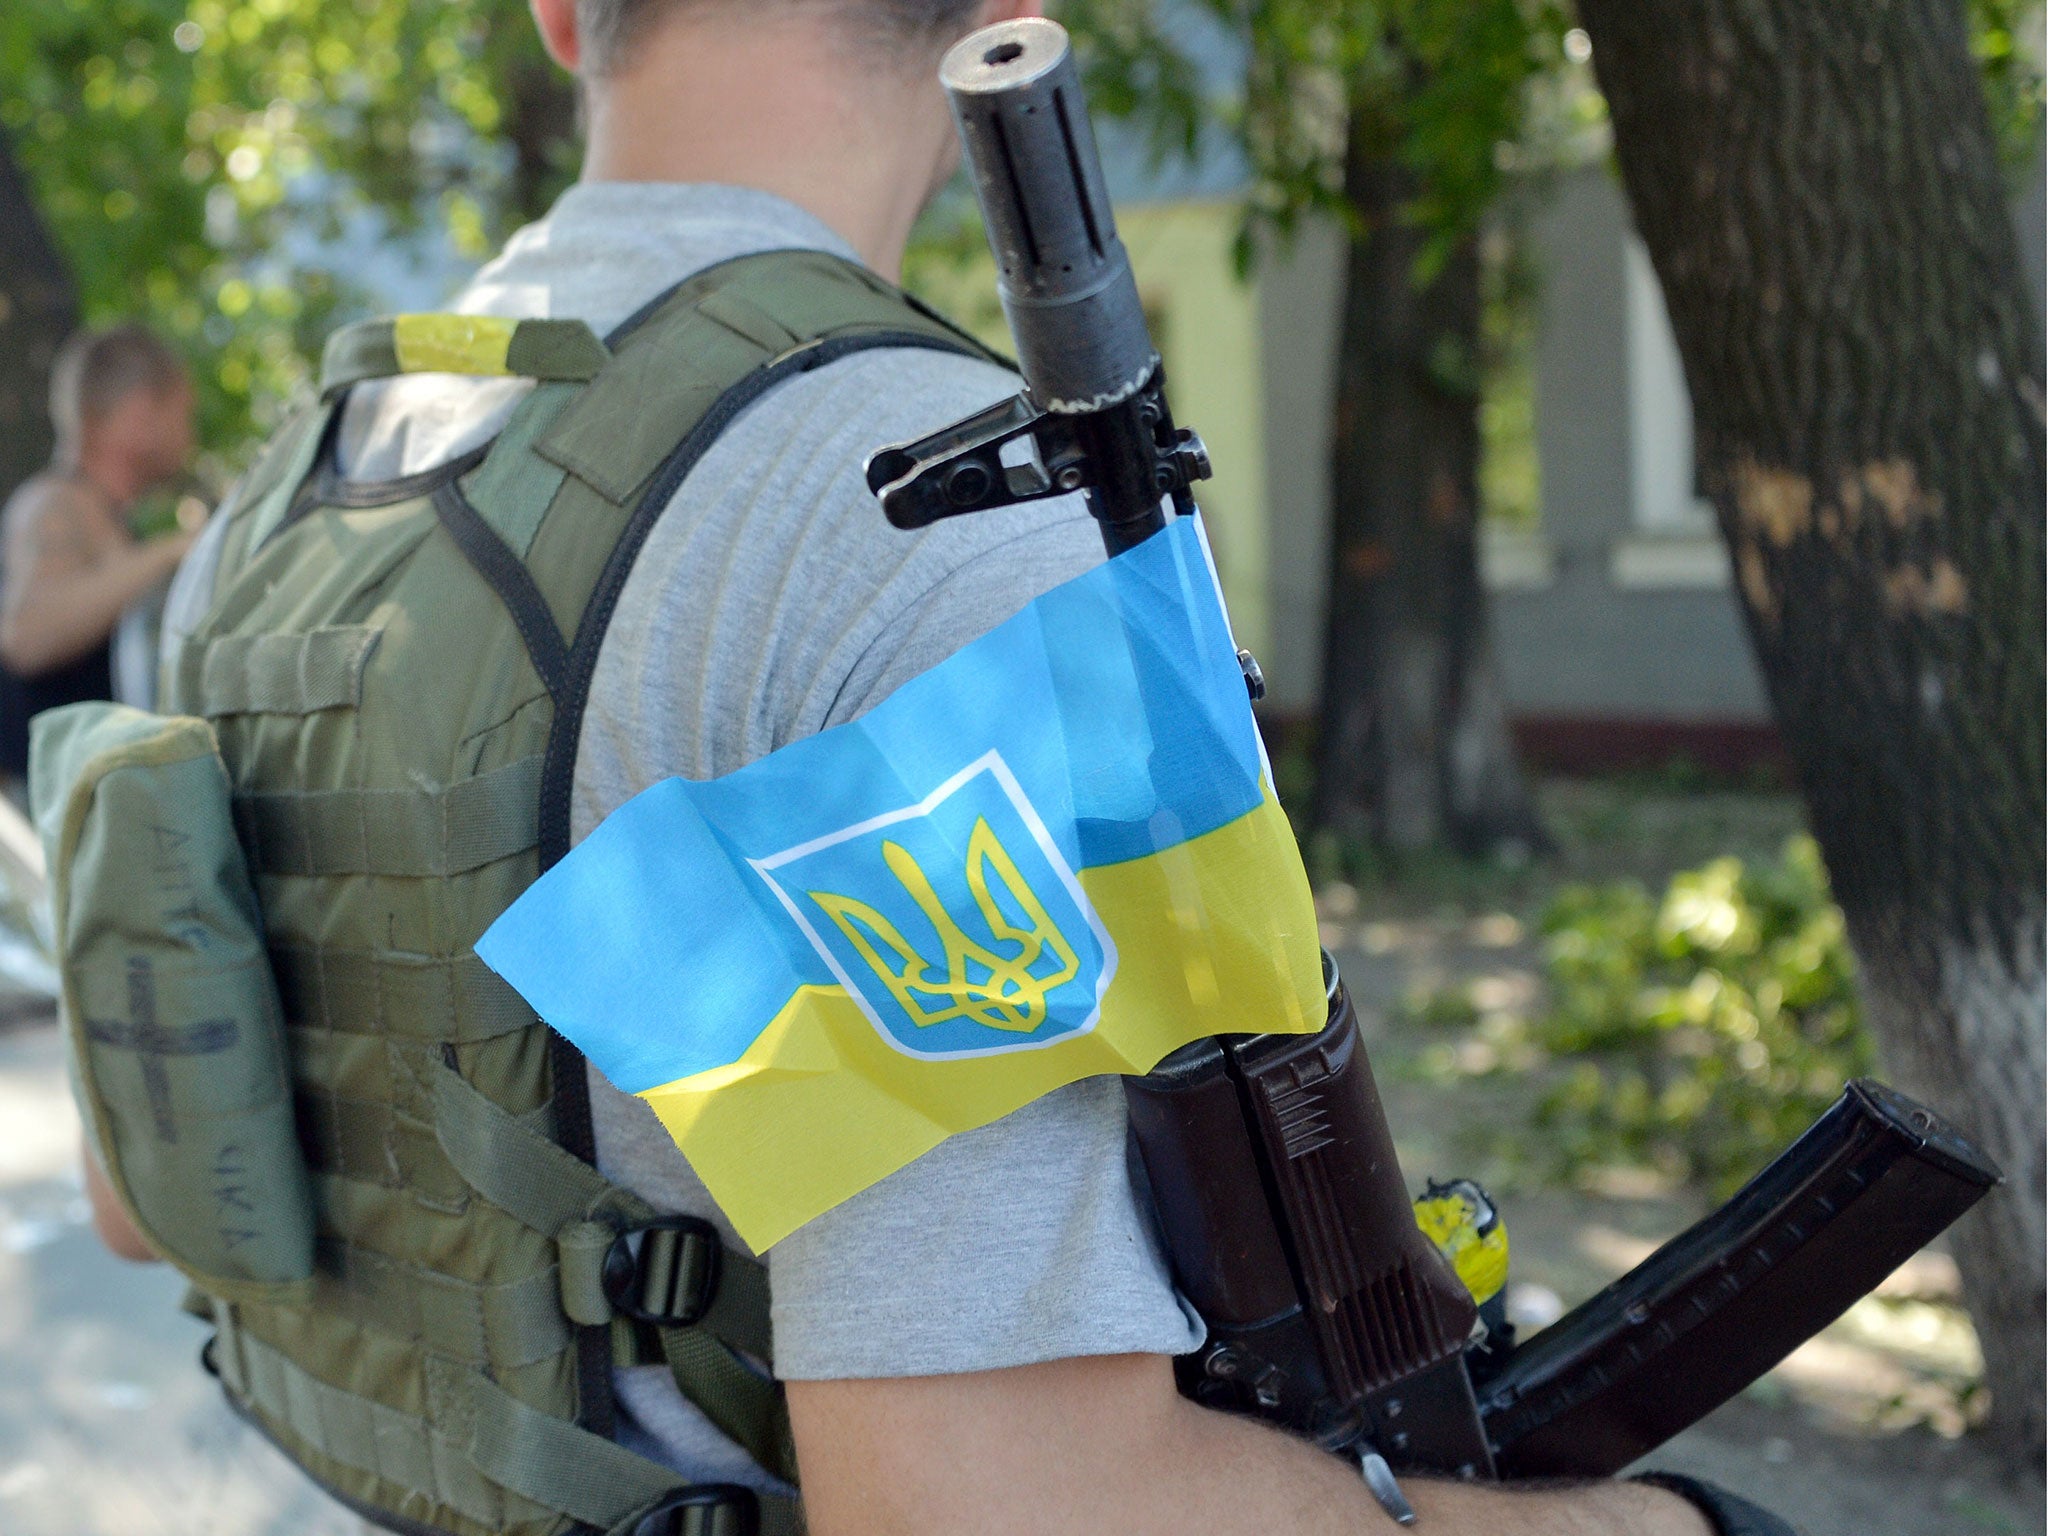 A member of the pro-Ukraine Donbass Battalion holds an automatic rifle with Ukraine's national flag attached to it, while patroling the outskirts of the eastern Ukrainian city of Lysychansk. Ukrainian troops have retaken the strategically-important city o